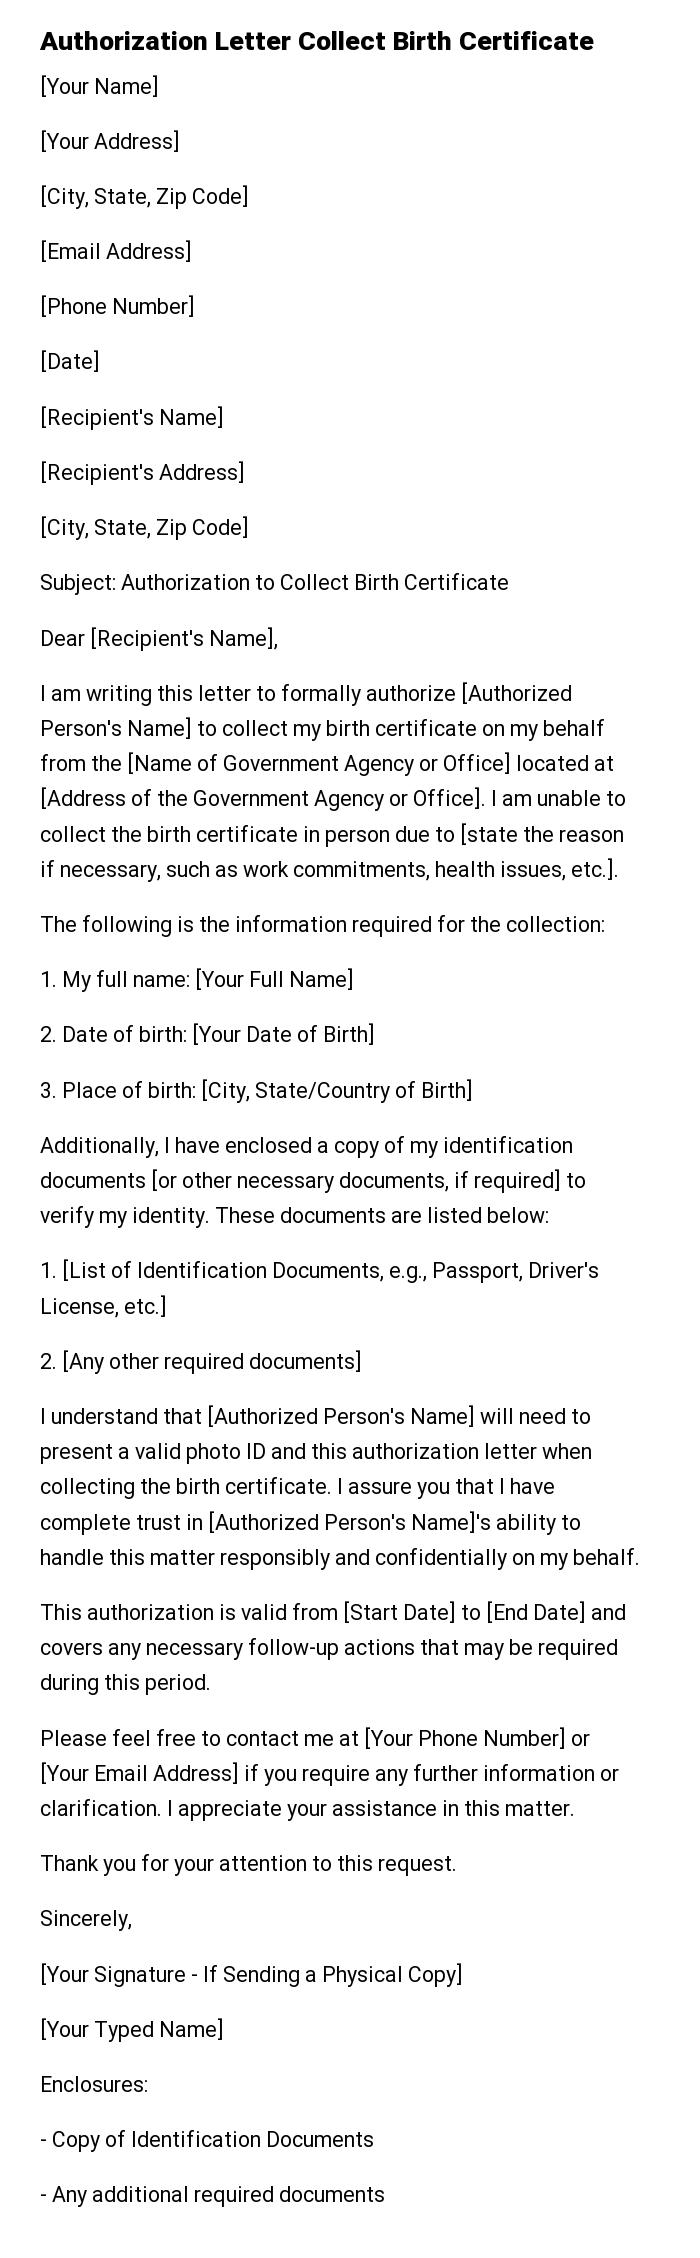 Authorization Letter Collect Birth Certificate